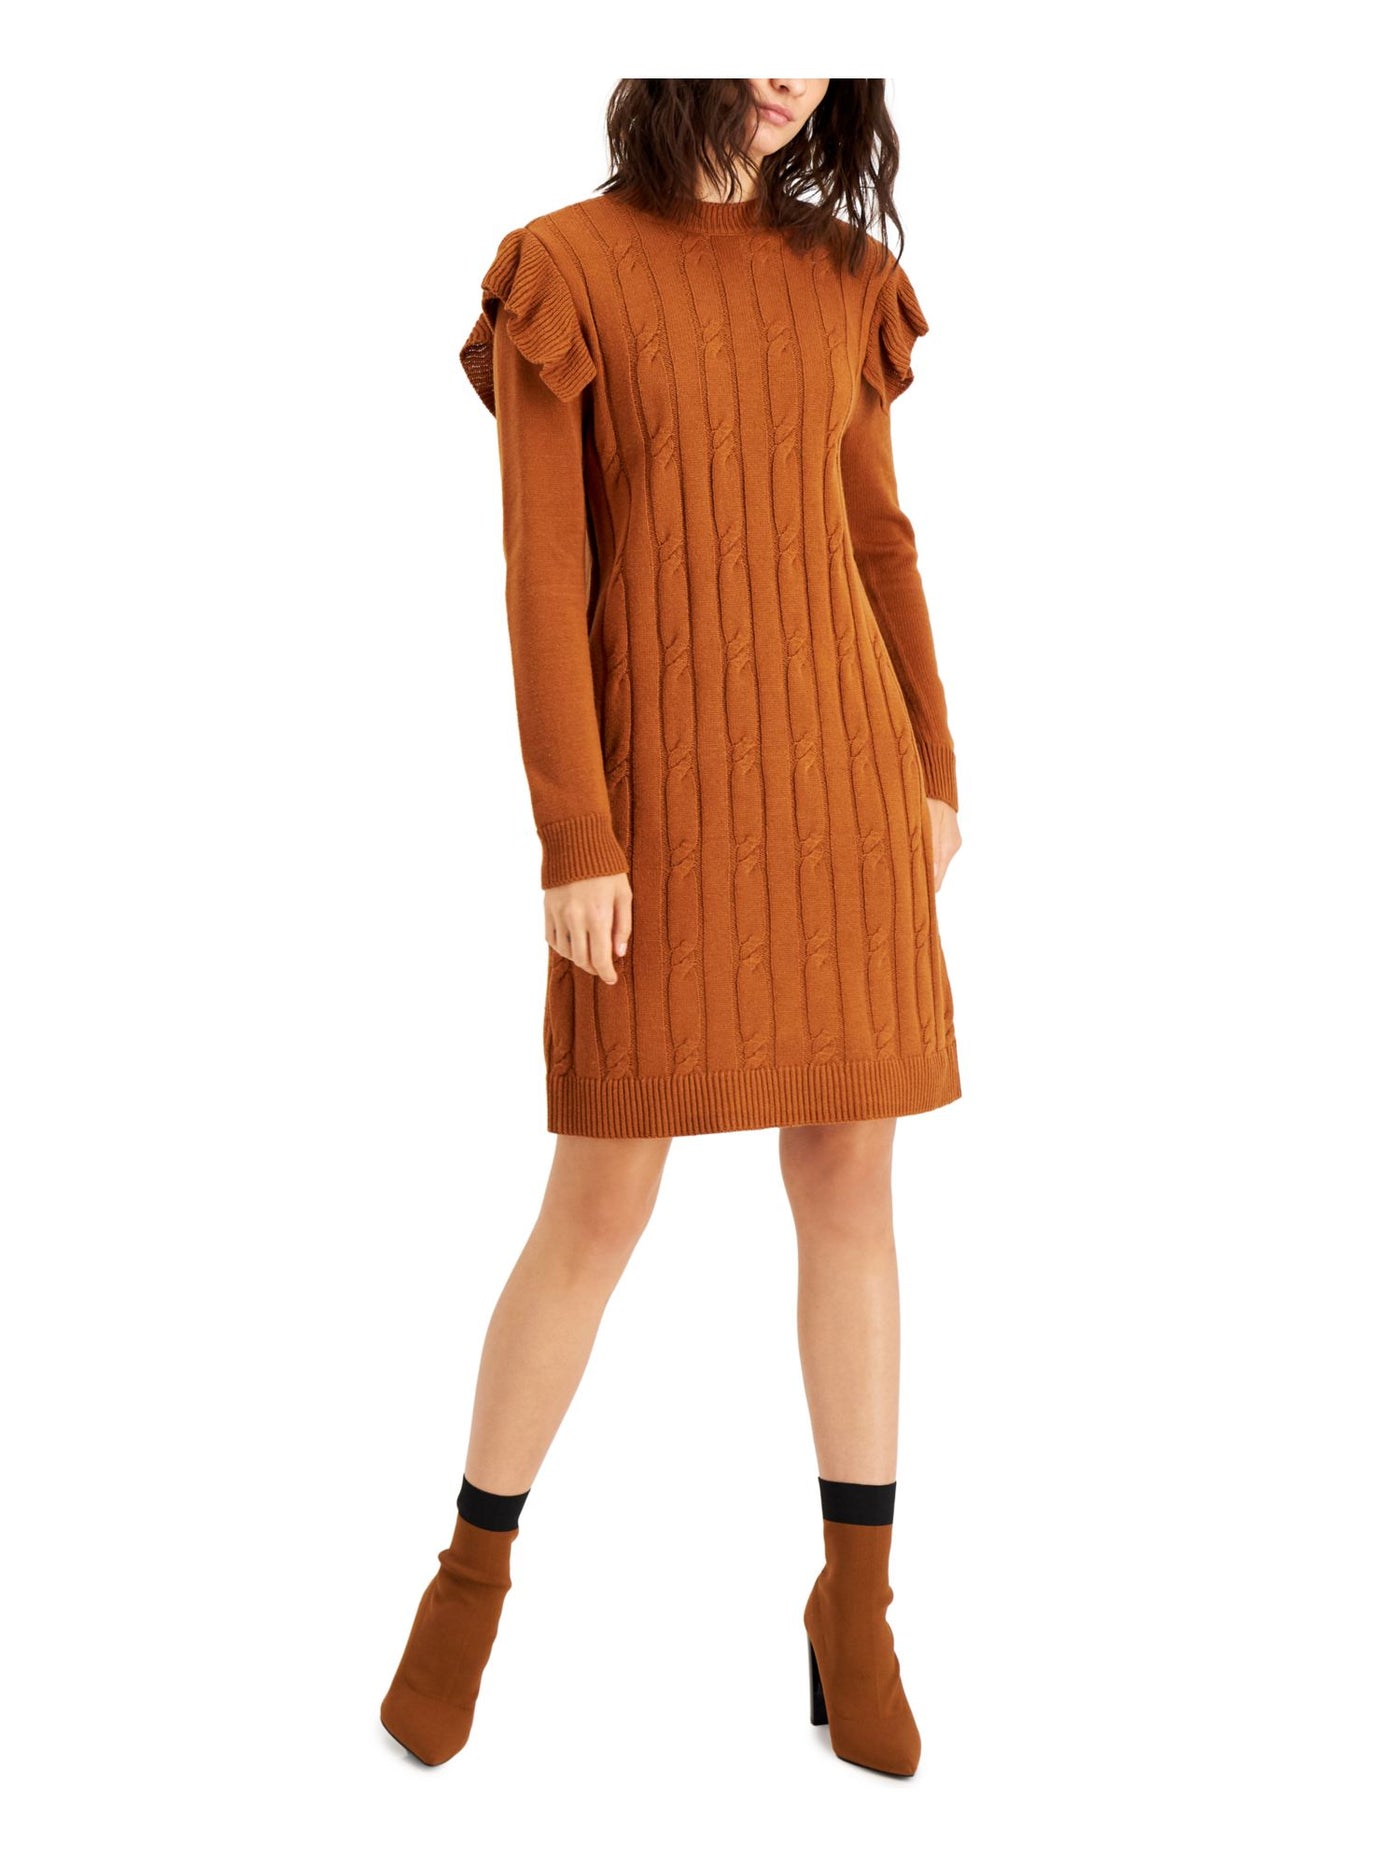 BAR III DRESSES Womens Brown Ruffled Cable-knit Front Long Sleeve Crew Neck Above The Knee Sweater Dress XS